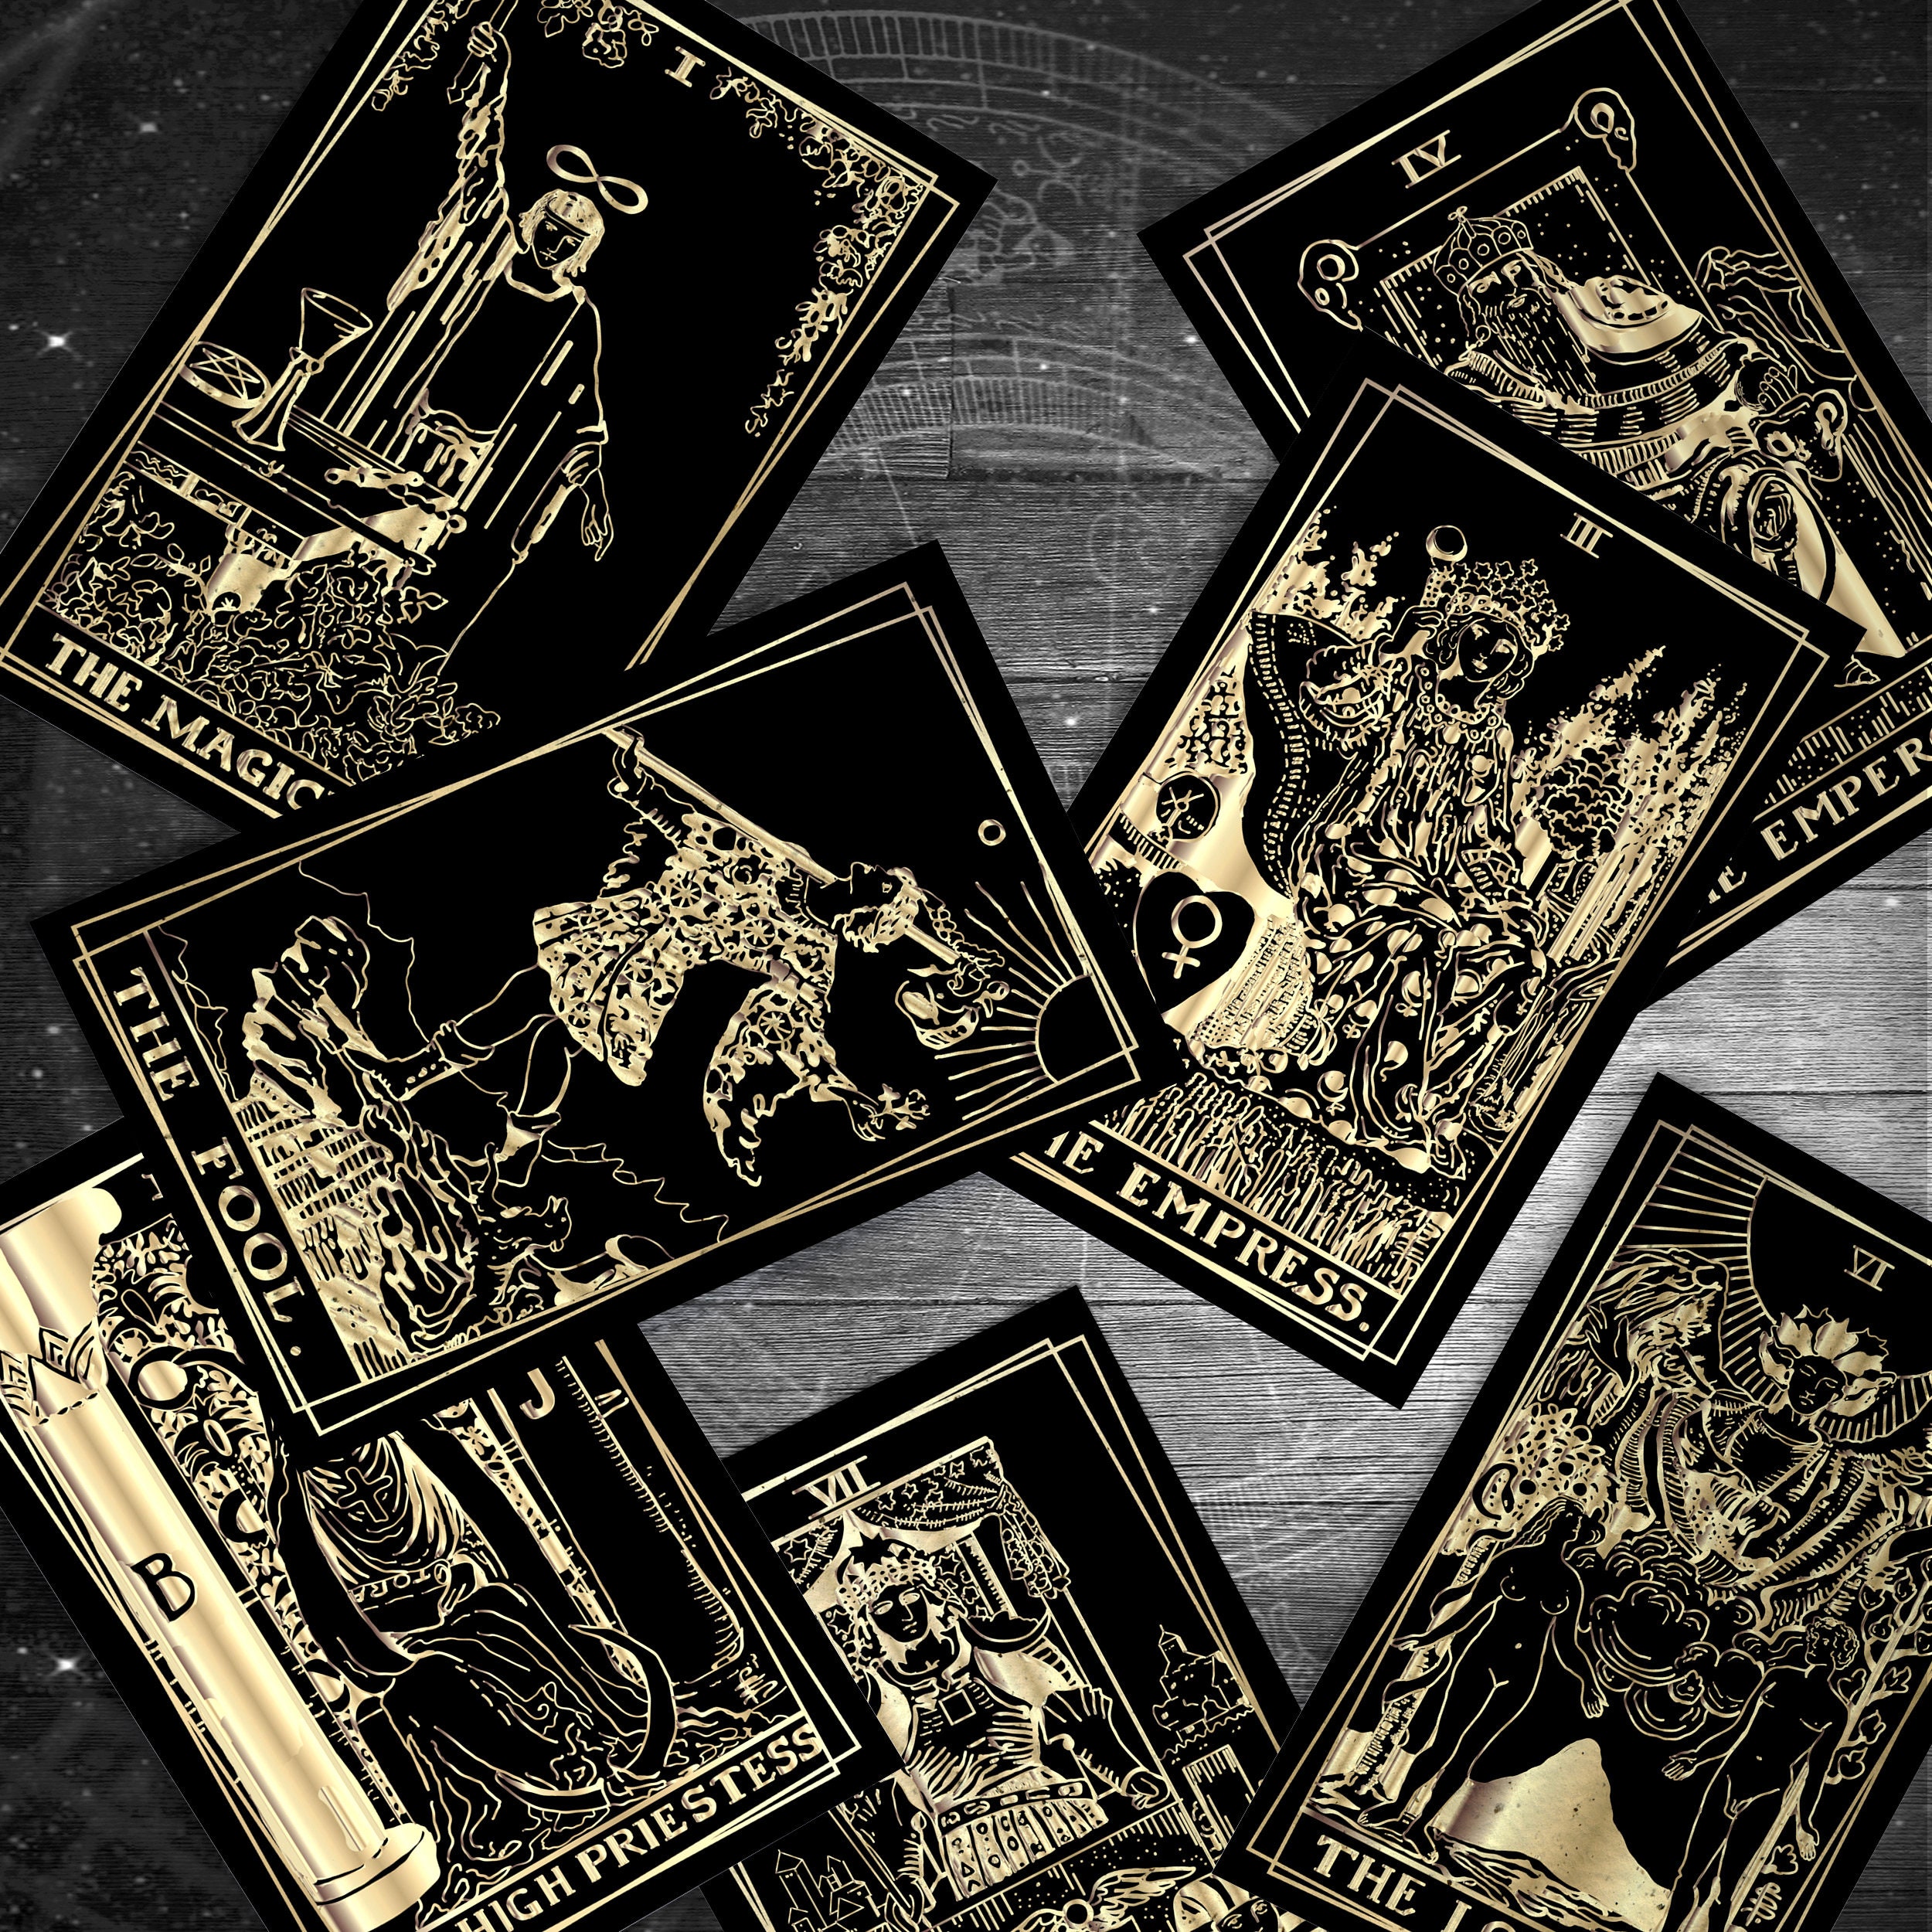 With 'Villains' tarot deck, Disney pushes the mystical practice further  into mainstream